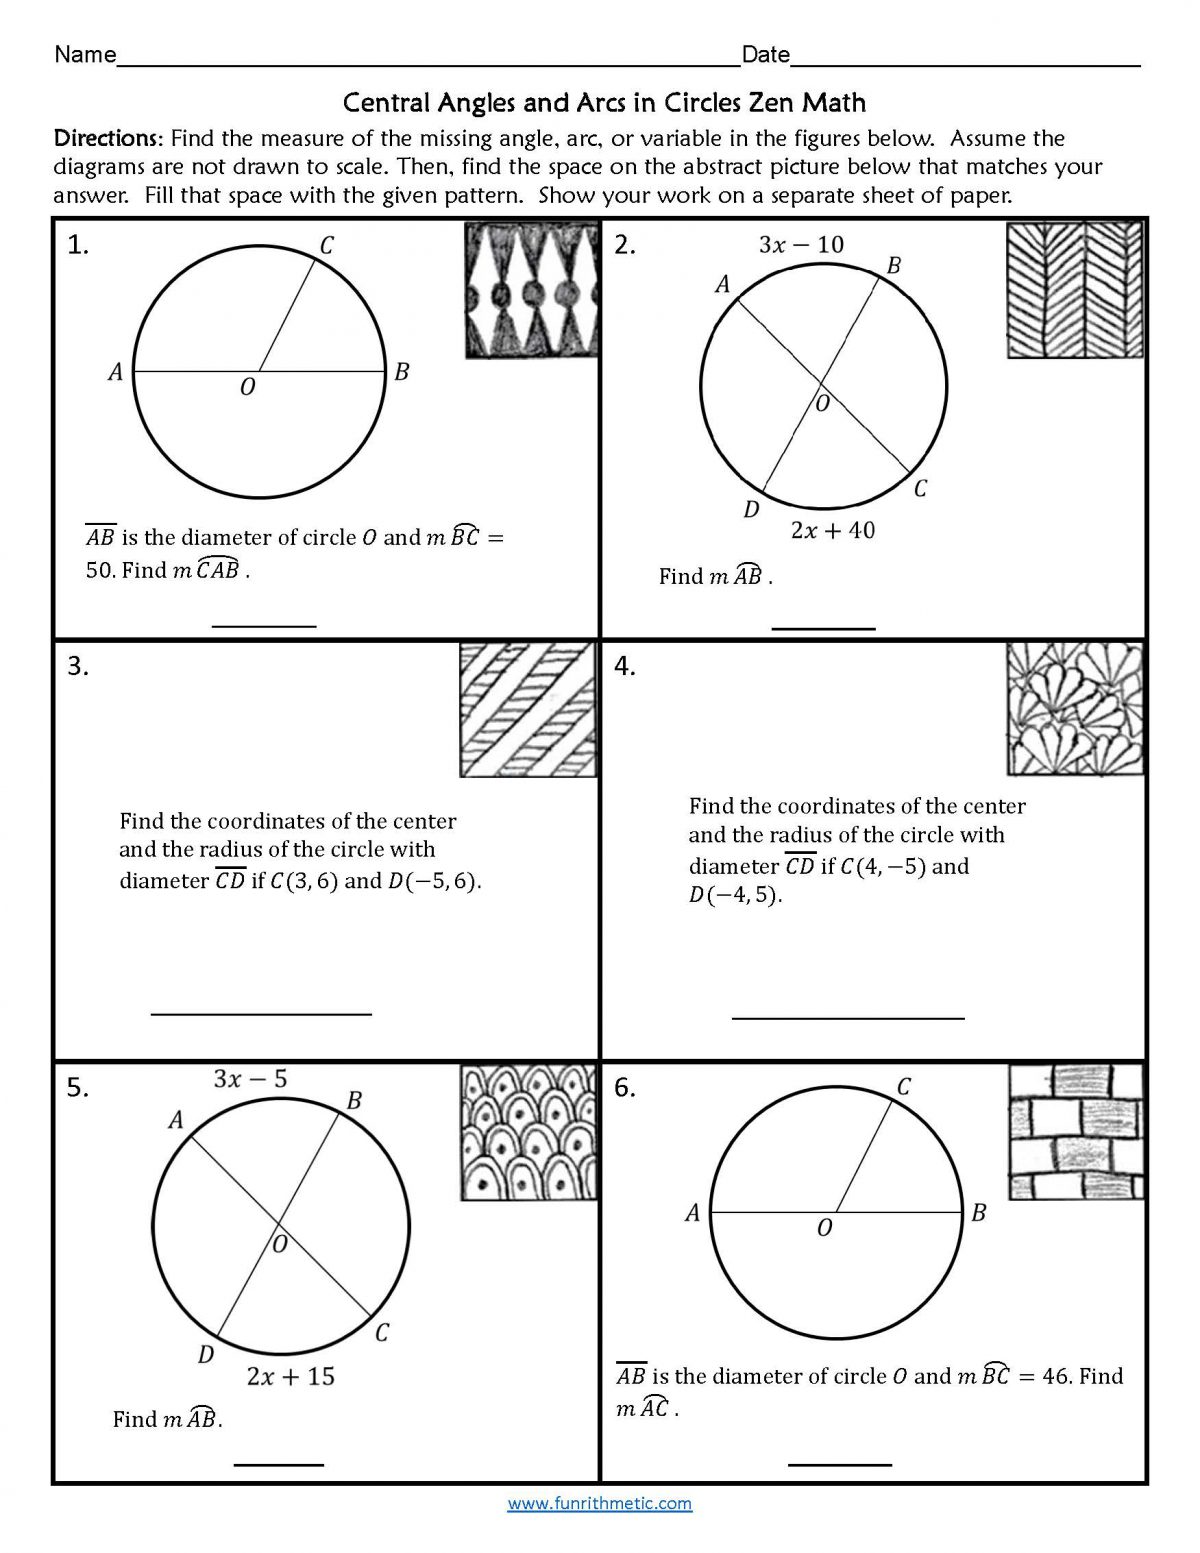 central angles and arcs